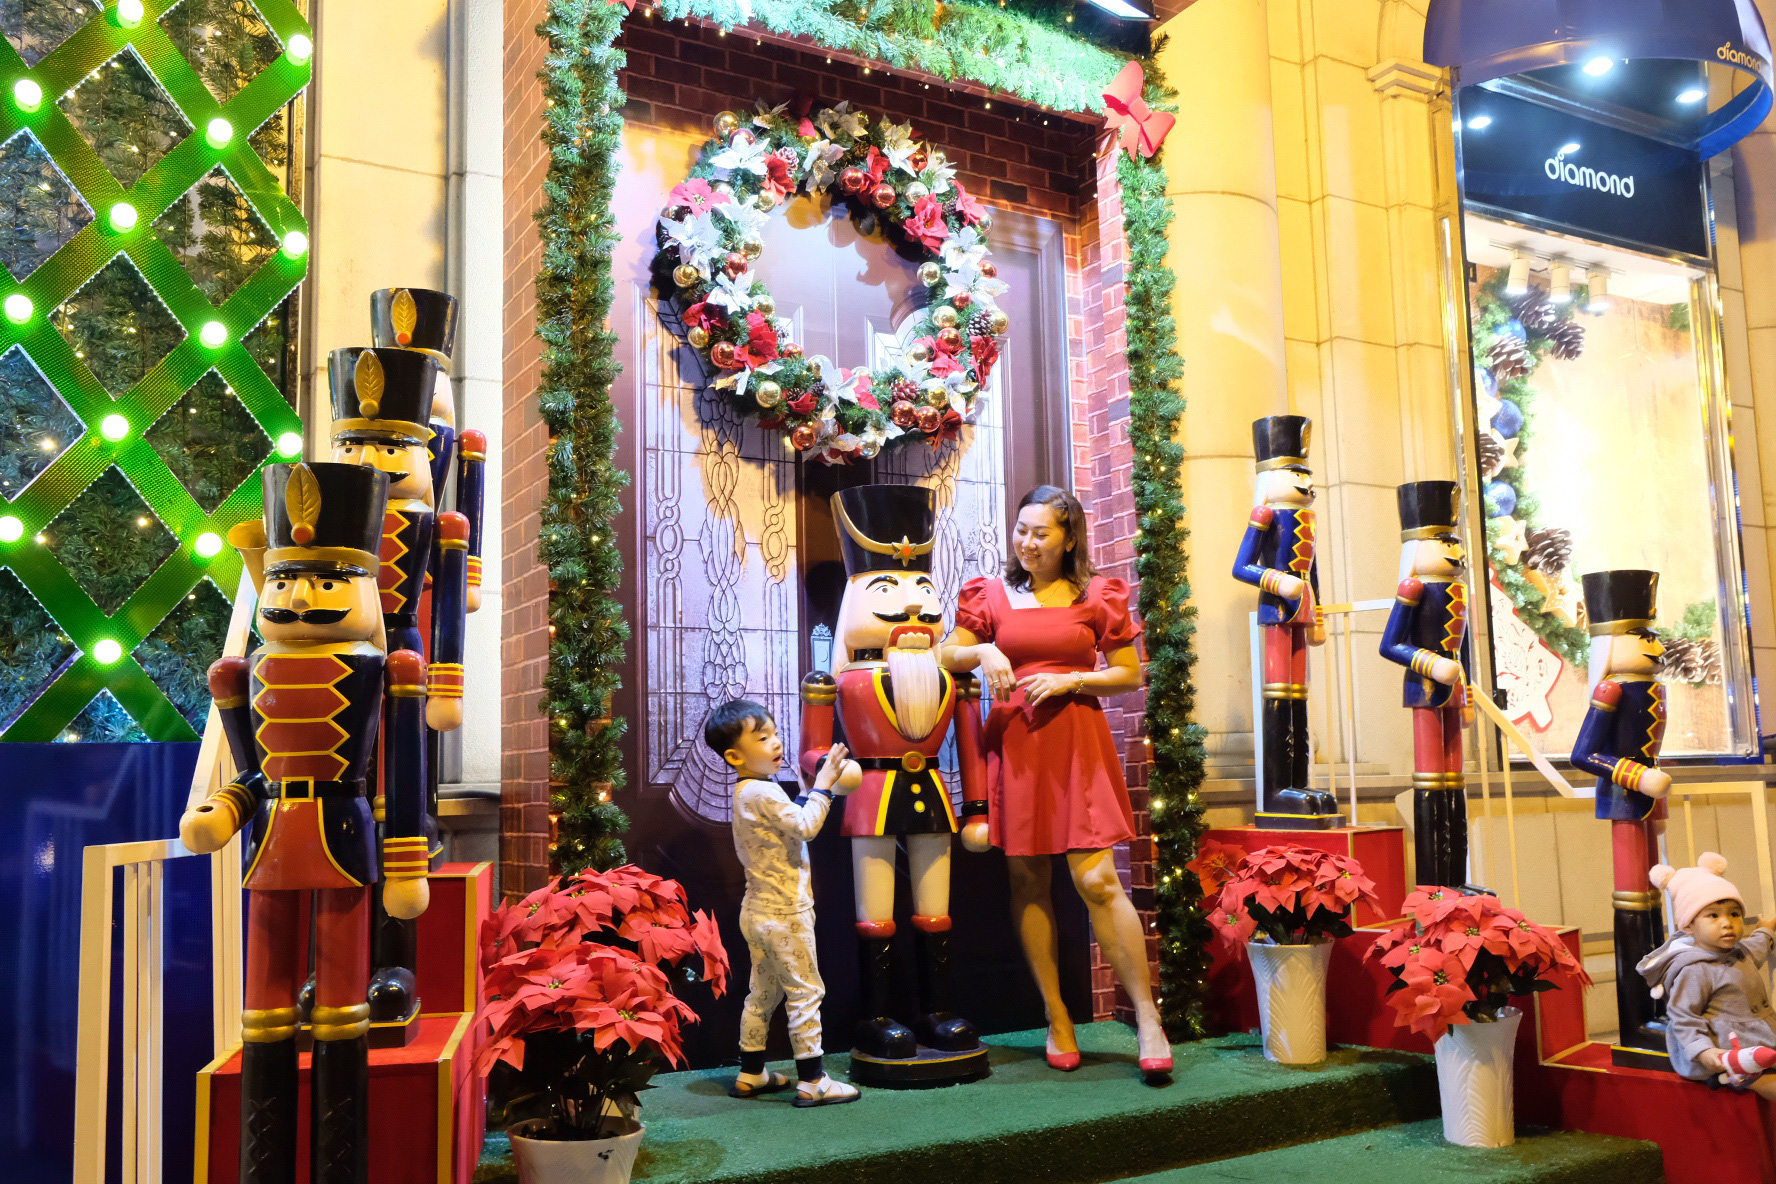 Demand for Christmas decorations rising as holiday spirit spreads in Ho Chi Minh City